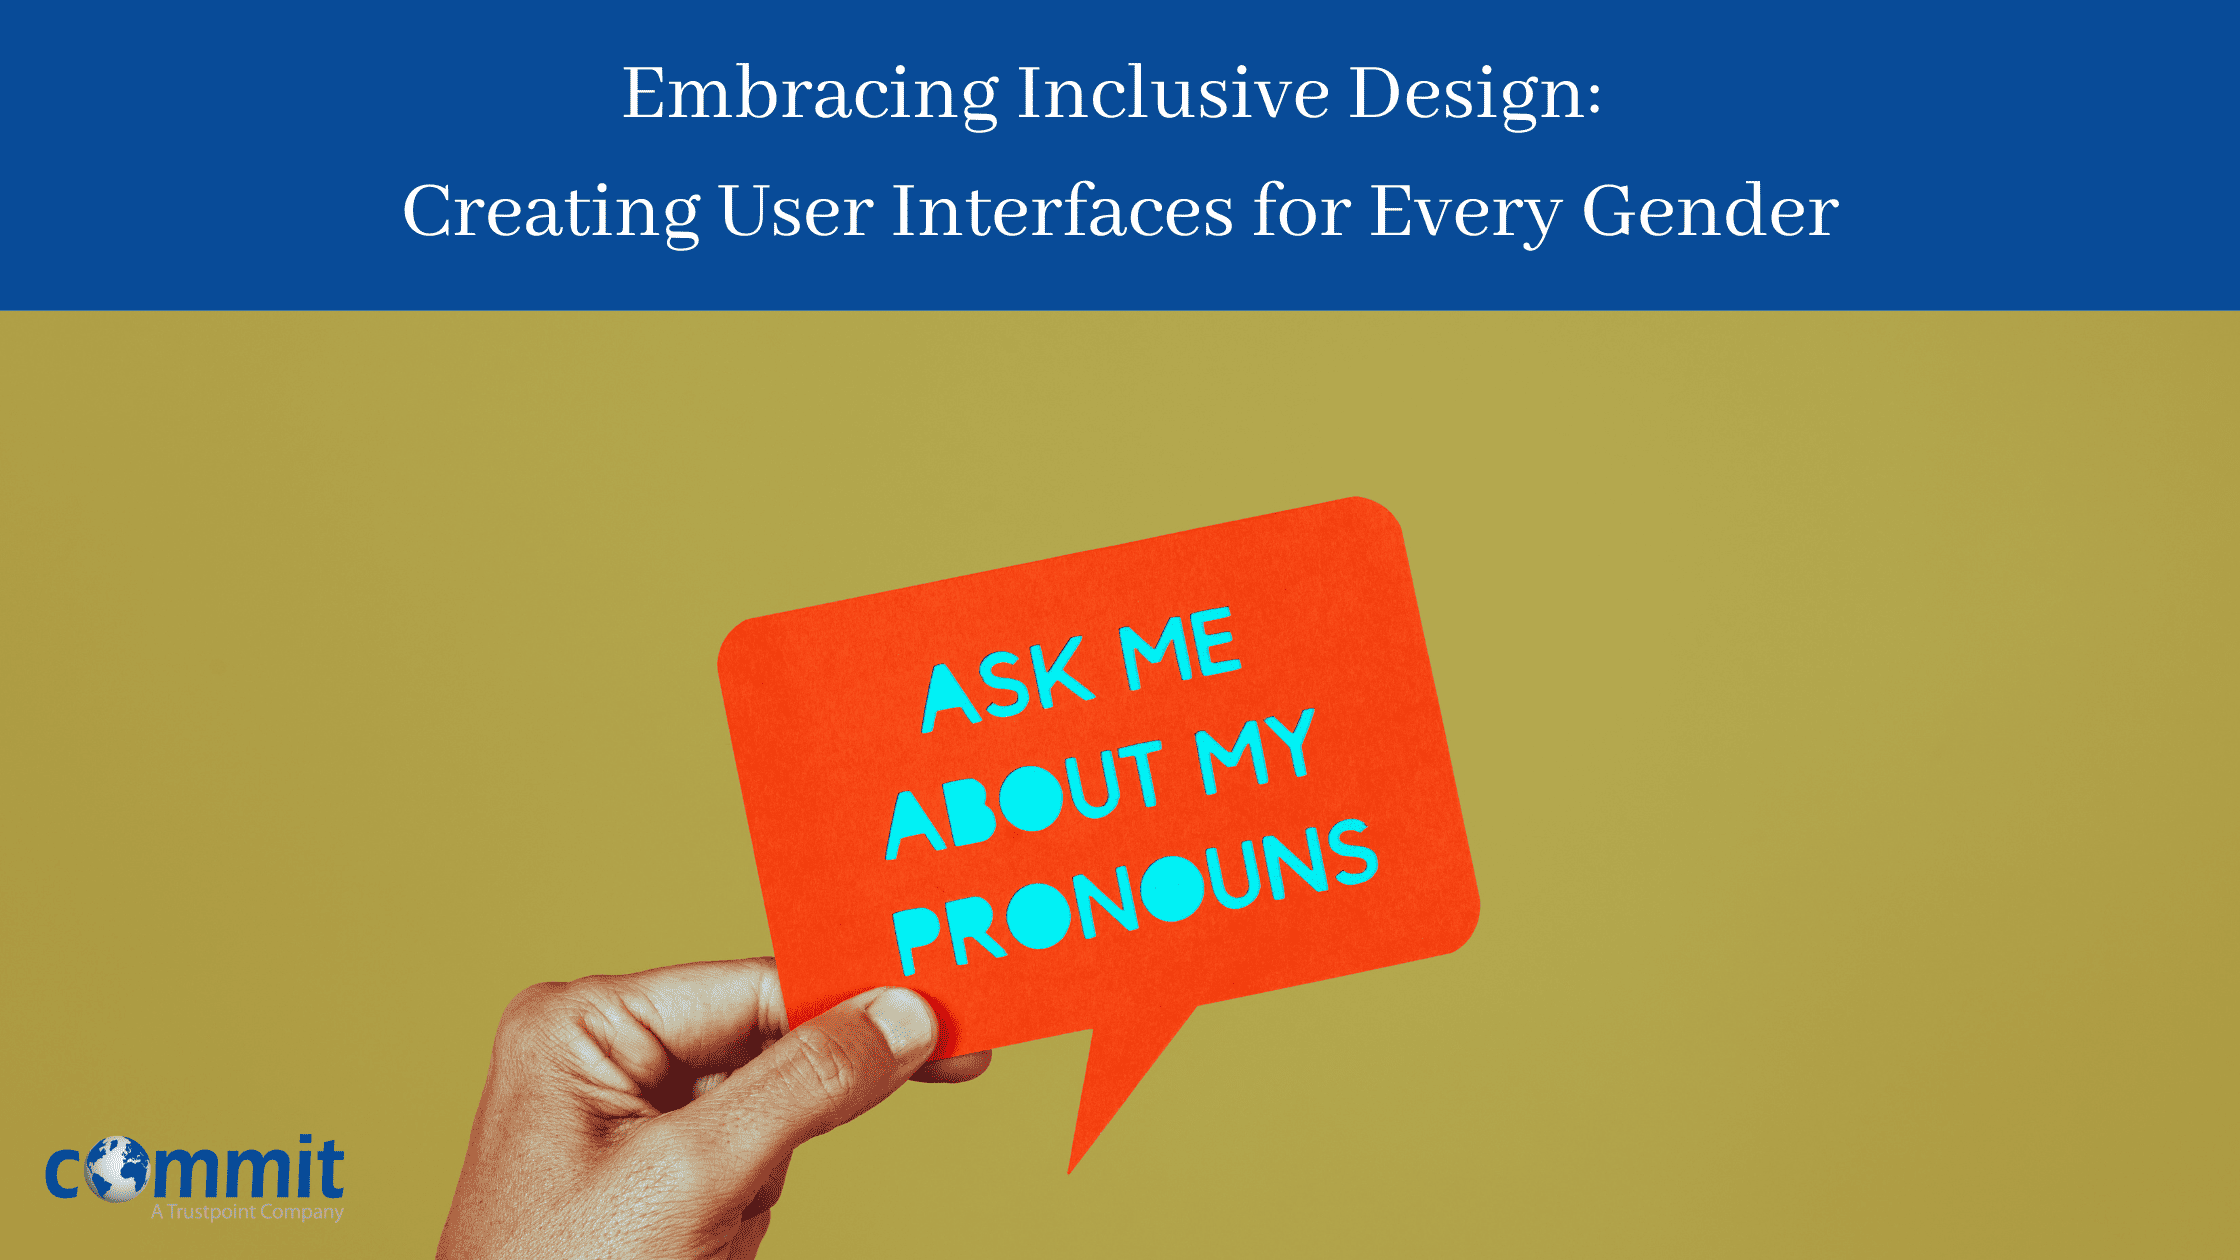 Embracing Inclusive Design: Creating Interfaces for Every Gender